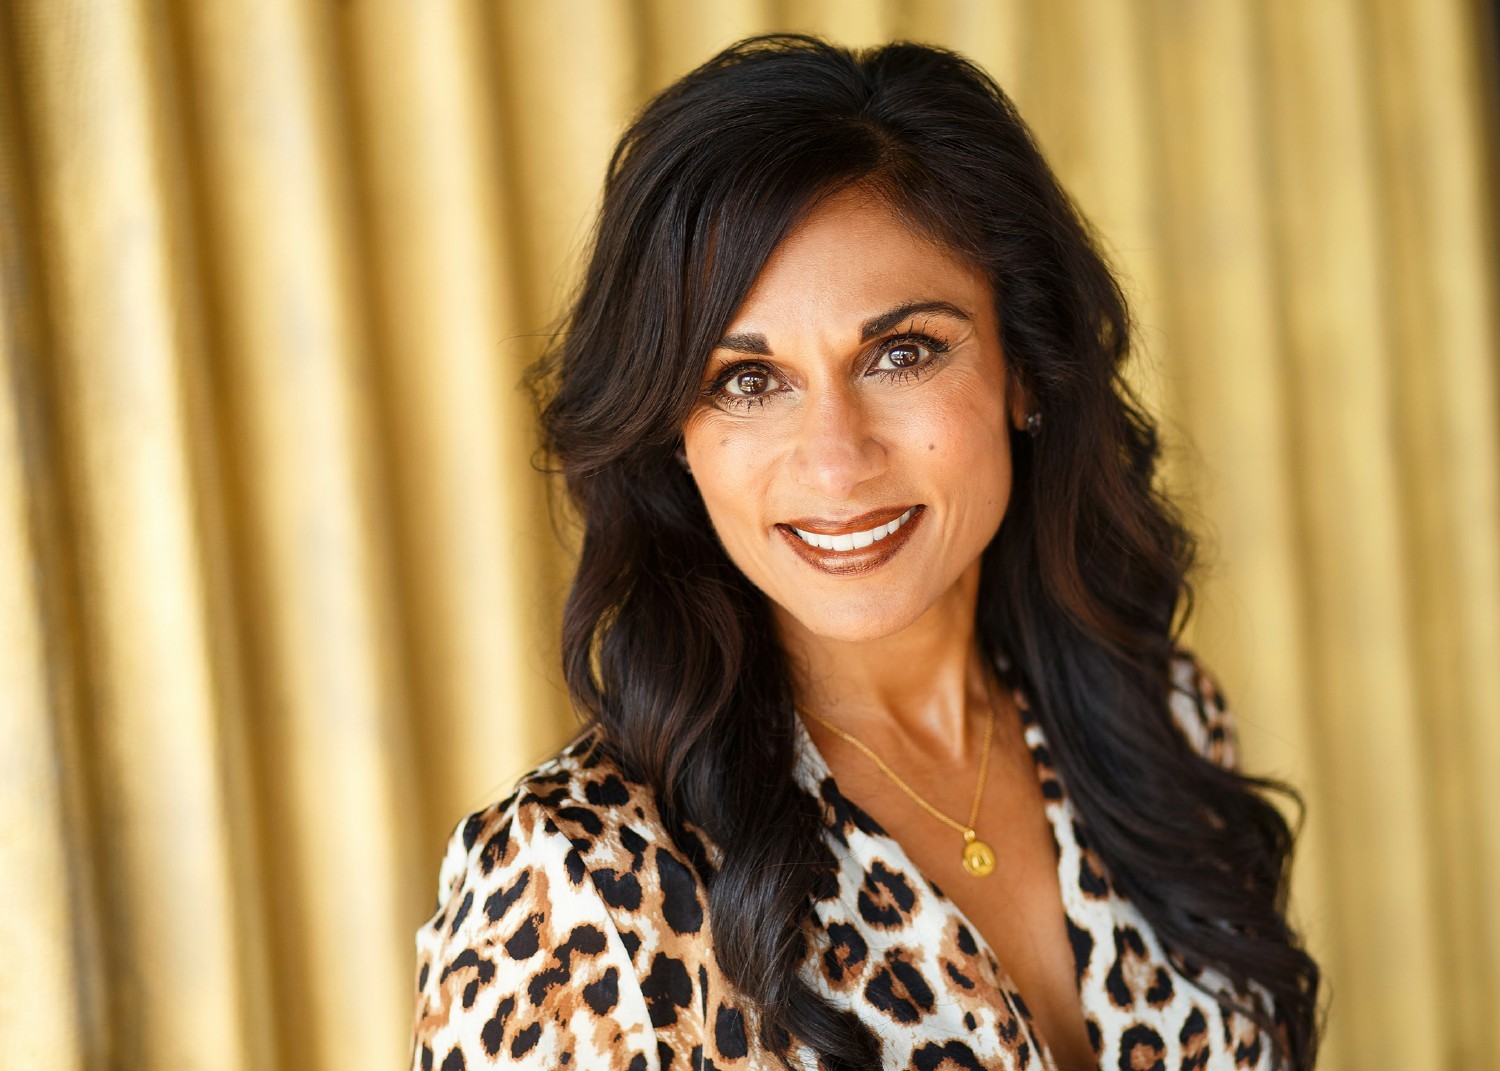 People-Driven Leadership:  CEO and Superintendent of Schools, Dr. Bhavna Sharma-Lewis